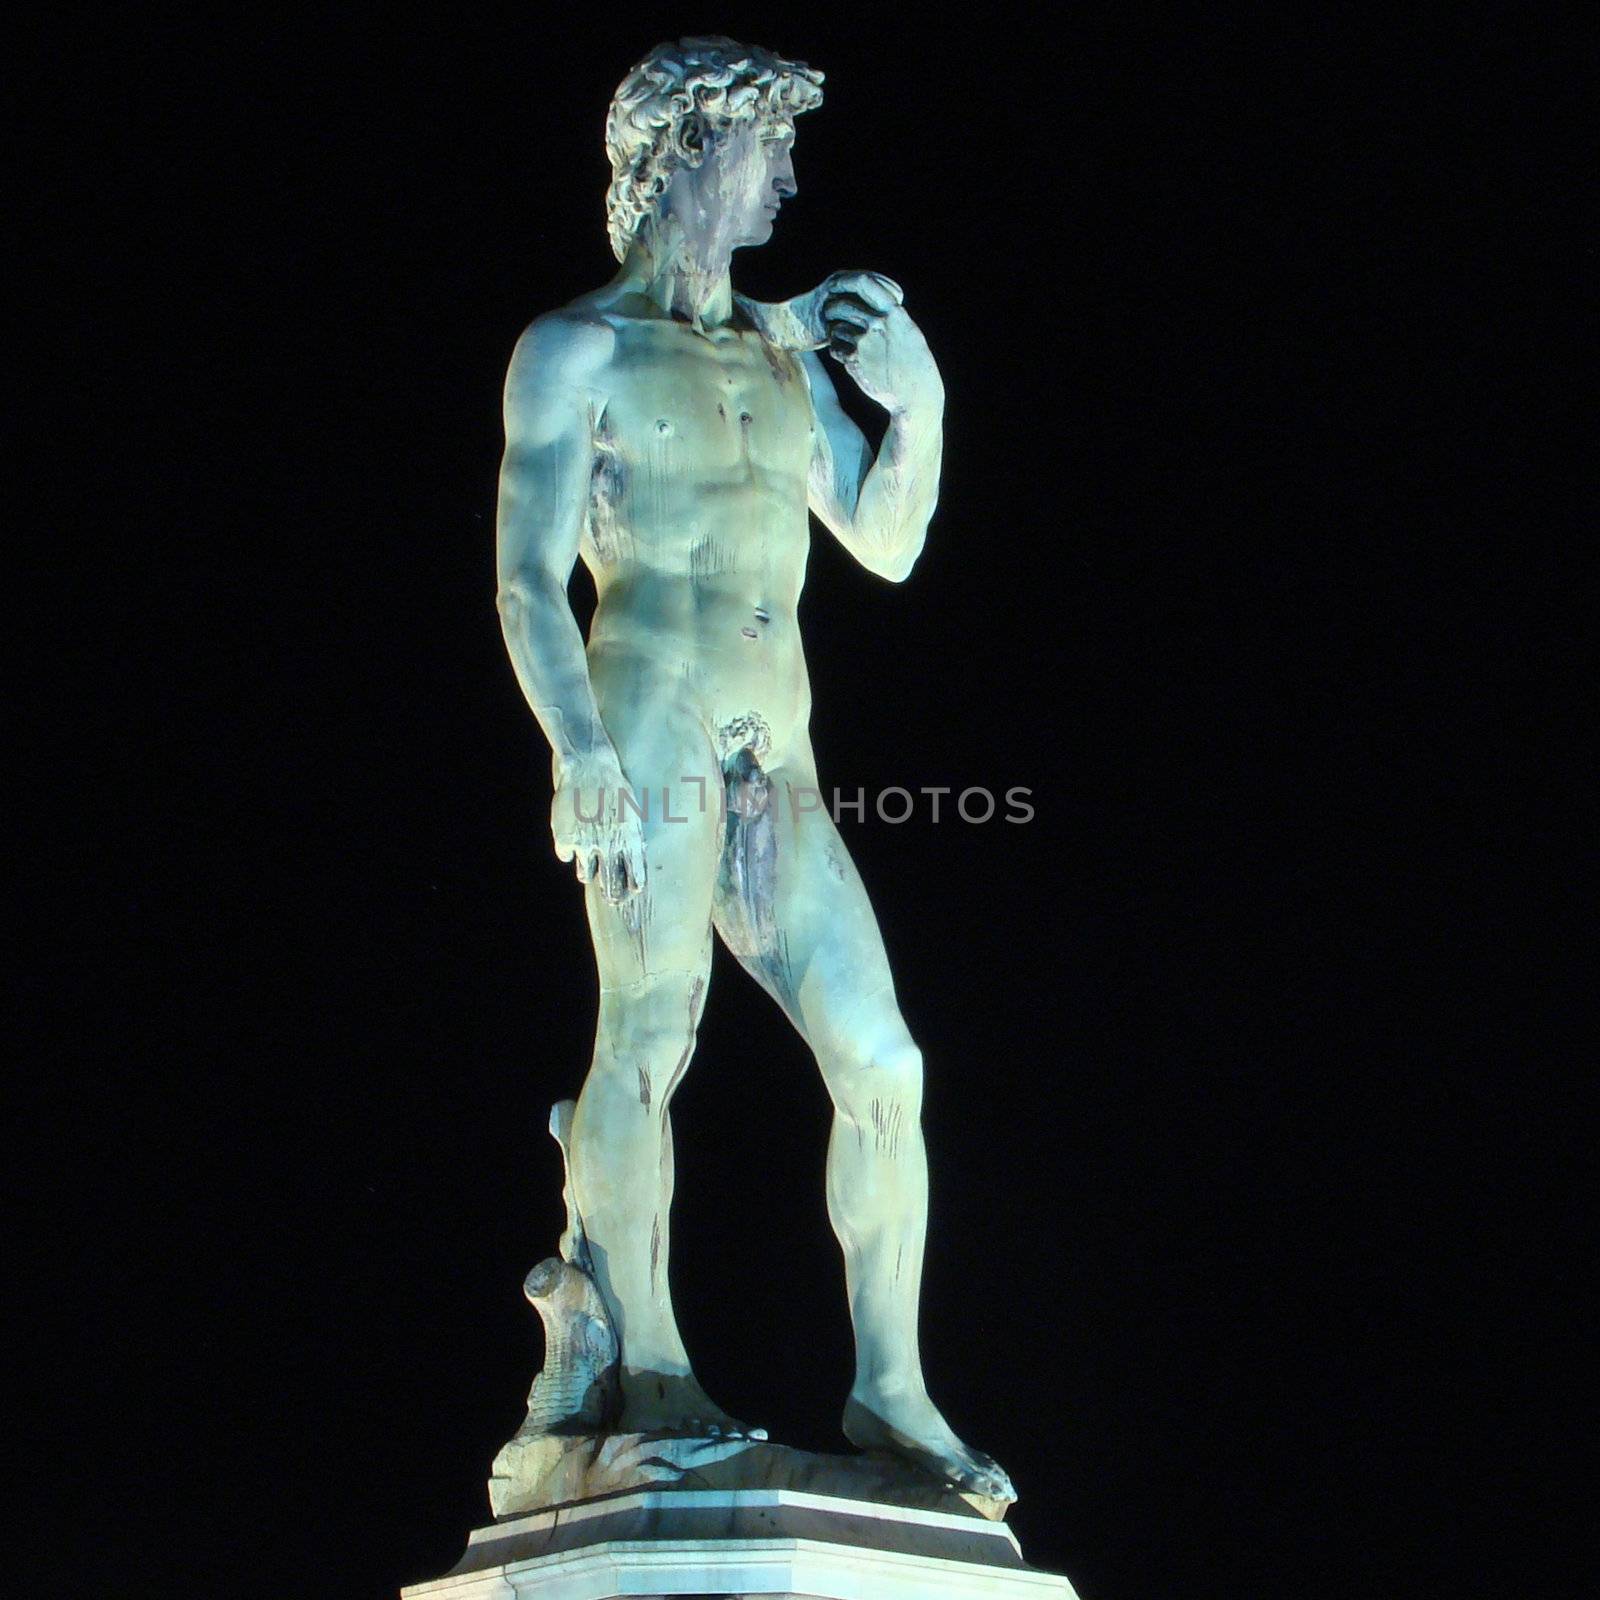 Statue of David by Michelangelo in Florence on Piazzale Michelangelo,Tuscany